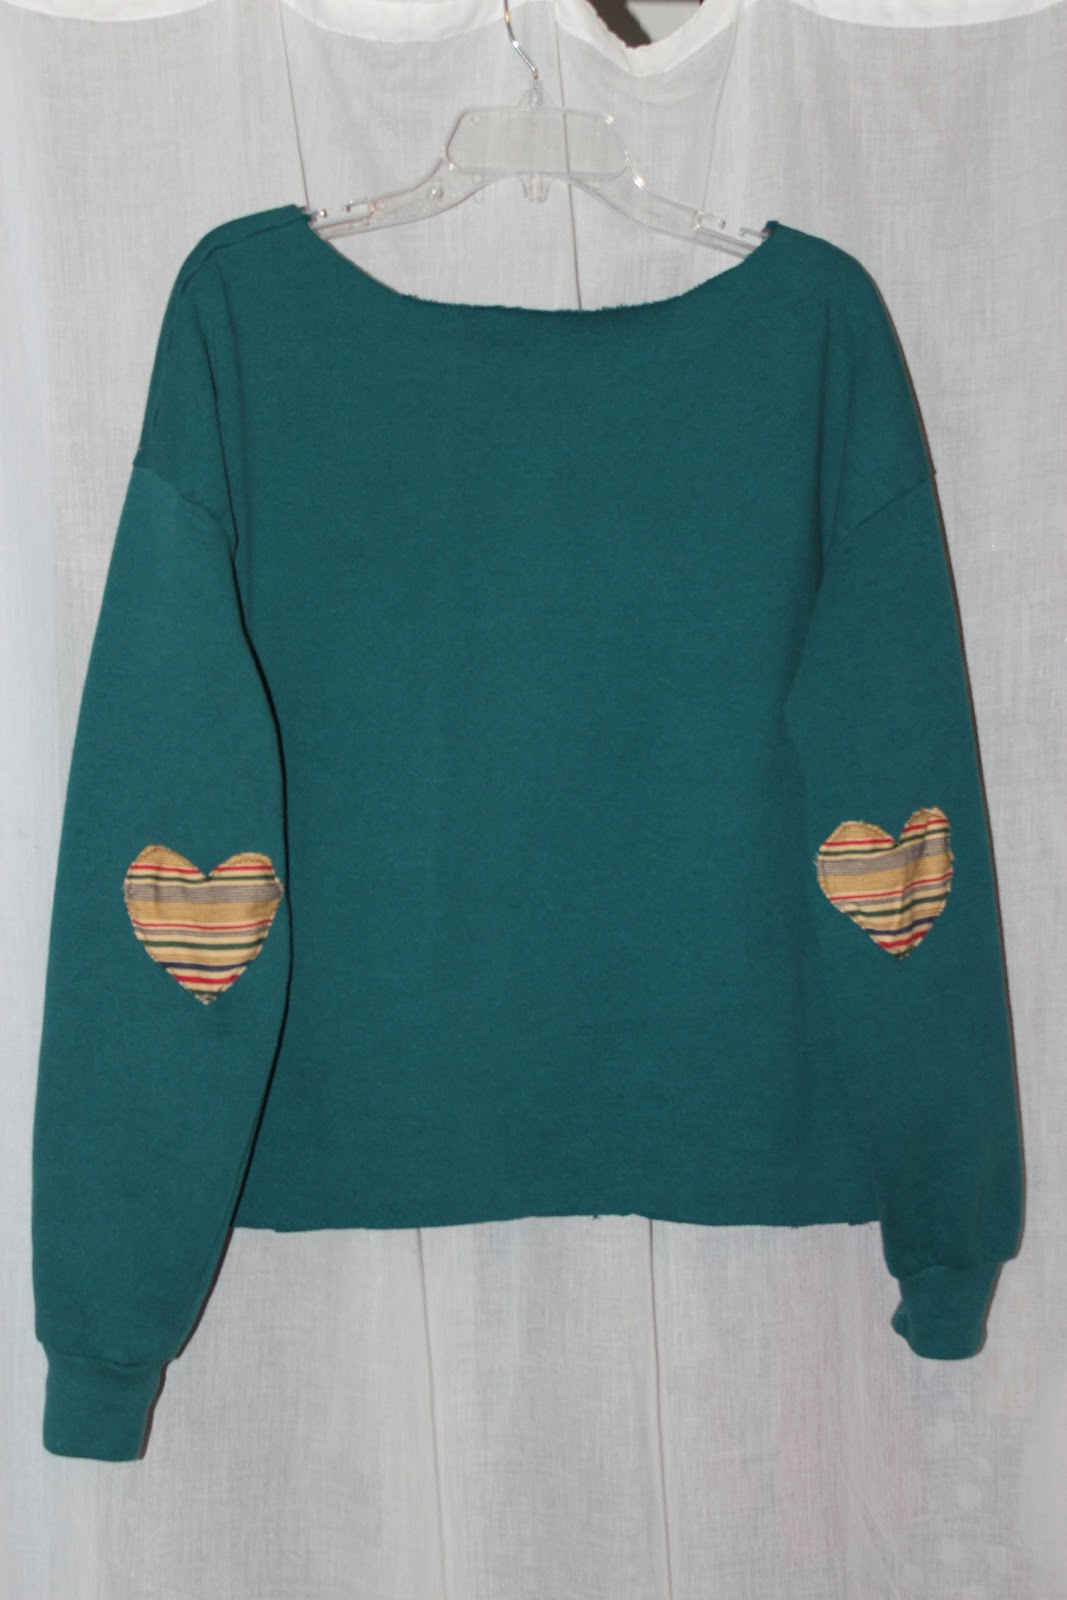 Niki's Notebook: Heart Sweatshirt with Elbow Patches Refashion